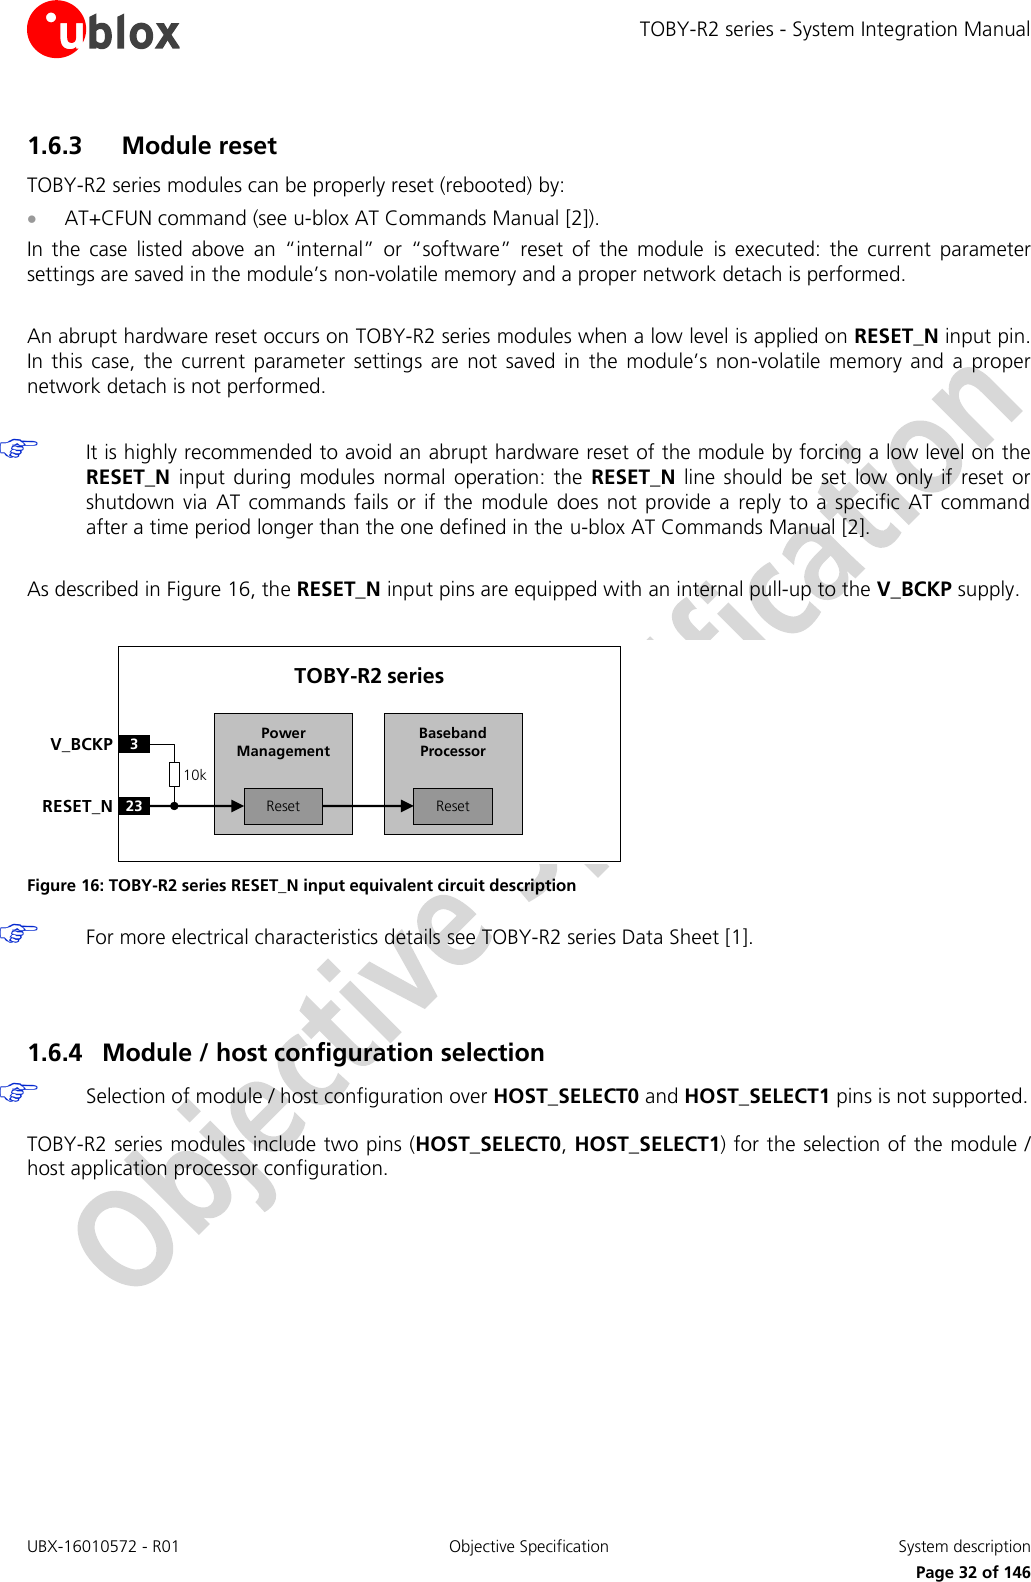 TOBY-R2 series - System Integration Manual UBX-16010572 - R01  Objective Specification  System description     Page 32 of 146 1.6.3 Module reset TOBY-R2 series modules can be properly reset (rebooted) by:  AT+CFUN command (see u-blox AT Commands Manual [2]). In  the  case  listed  above  an  “internal”  or  “software”  reset  of  the  module  is  executed:  the  current  parameter settings are saved in the module’s non-volatile memory and a proper network detach is performed.  An abrupt hardware reset occurs on TOBY-R2 series modules when a low level is applied on RESET_N input pin. In  this  case,  the  current  parameter  settings  are  not  saved  in  the  module’s  non-volatile  memory  and  a  proper network detach is not performed.   It is highly recommended to avoid an abrupt hardware reset of the module by forcing a low level on the RESET_N  input during  modules  normal operation:  the  RESET_N  line  should  be  set  low  only if  reset or shutdown  via  AT commands  fails  or if  the  module  does not  provide a  reply  to a  specific  AT command after a time period longer than the one defined in the u-blox AT Commands Manual [2].  As described in Figure 16, the RESET_N input pins are equipped with an internal pull-up to the V_BCKP supply.  Baseband Processor23RESET_NTOBY-R2 series3V_BCKPResetPower ManagementReset10k Figure 16: TOBY-R2 series RESET_N input equivalent circuit description  For more electrical characteristics details see TOBY-R2 series Data Sheet [1].   1.6.4 Module / host configuration selection  Selection of module / host configuration over HOST_SELECT0 and HOST_SELECT1 pins is not supported.  TOBY-R2 series modules include two pins (HOST_SELECT0, HOST_SELECT1) for the selection of the module / host application processor configuration.  